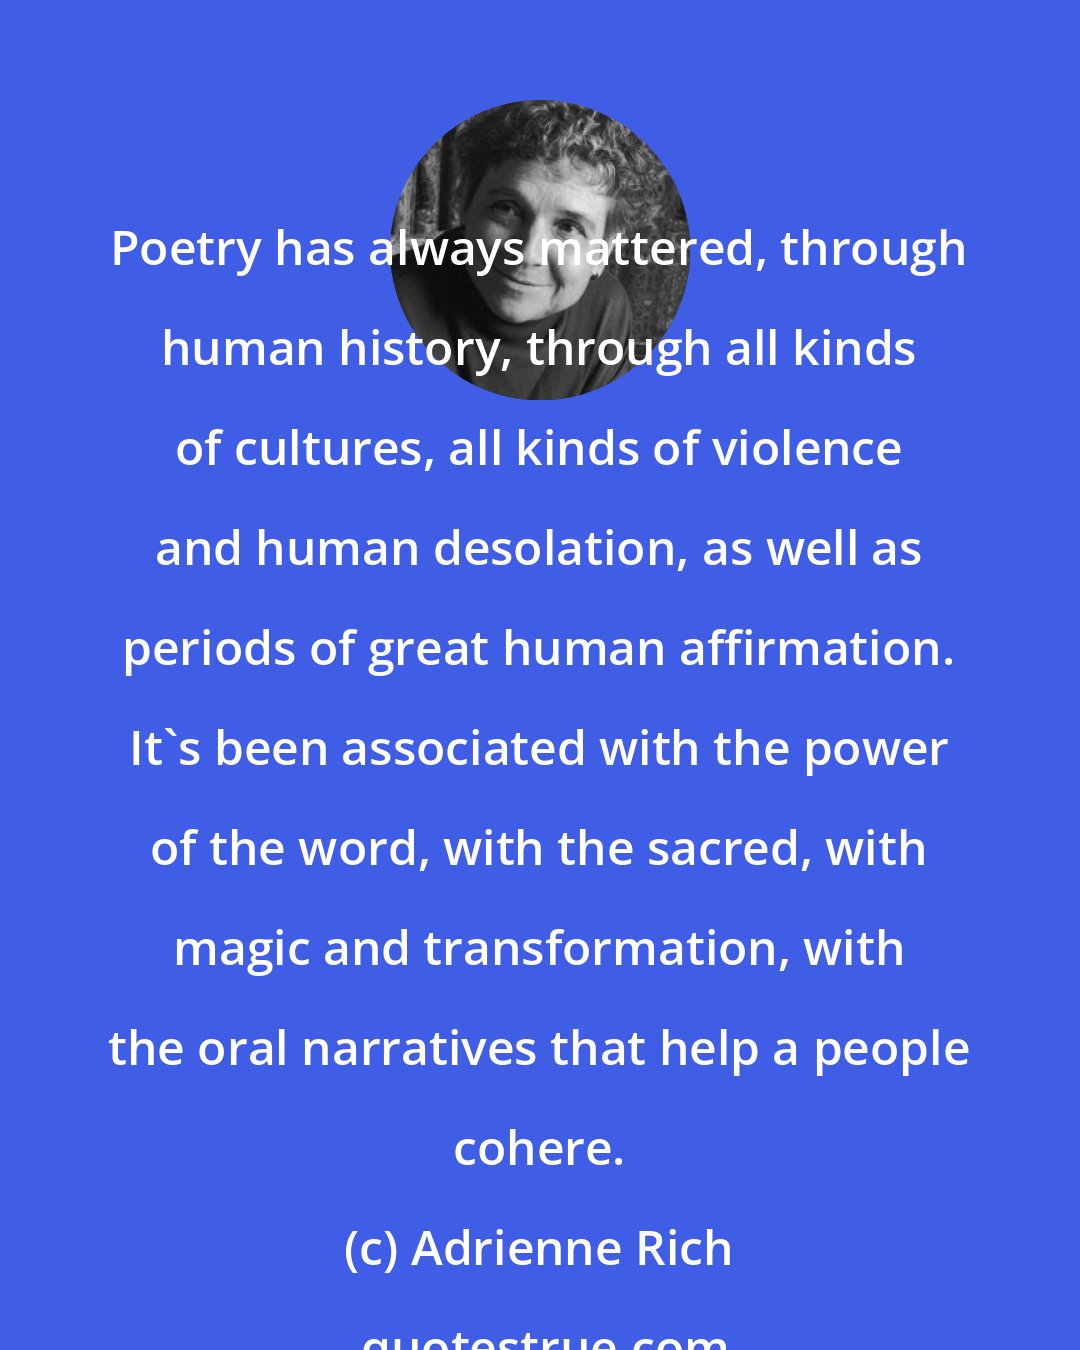 Adrienne Rich: Poetry has always mattered, through human history, through all kinds of cultures, all kinds of violence and human desolation, as well as periods of great human affirmation. It's been associated with the power of the word, with the sacred, with magic and transformation, with the oral narratives that help a people cohere.